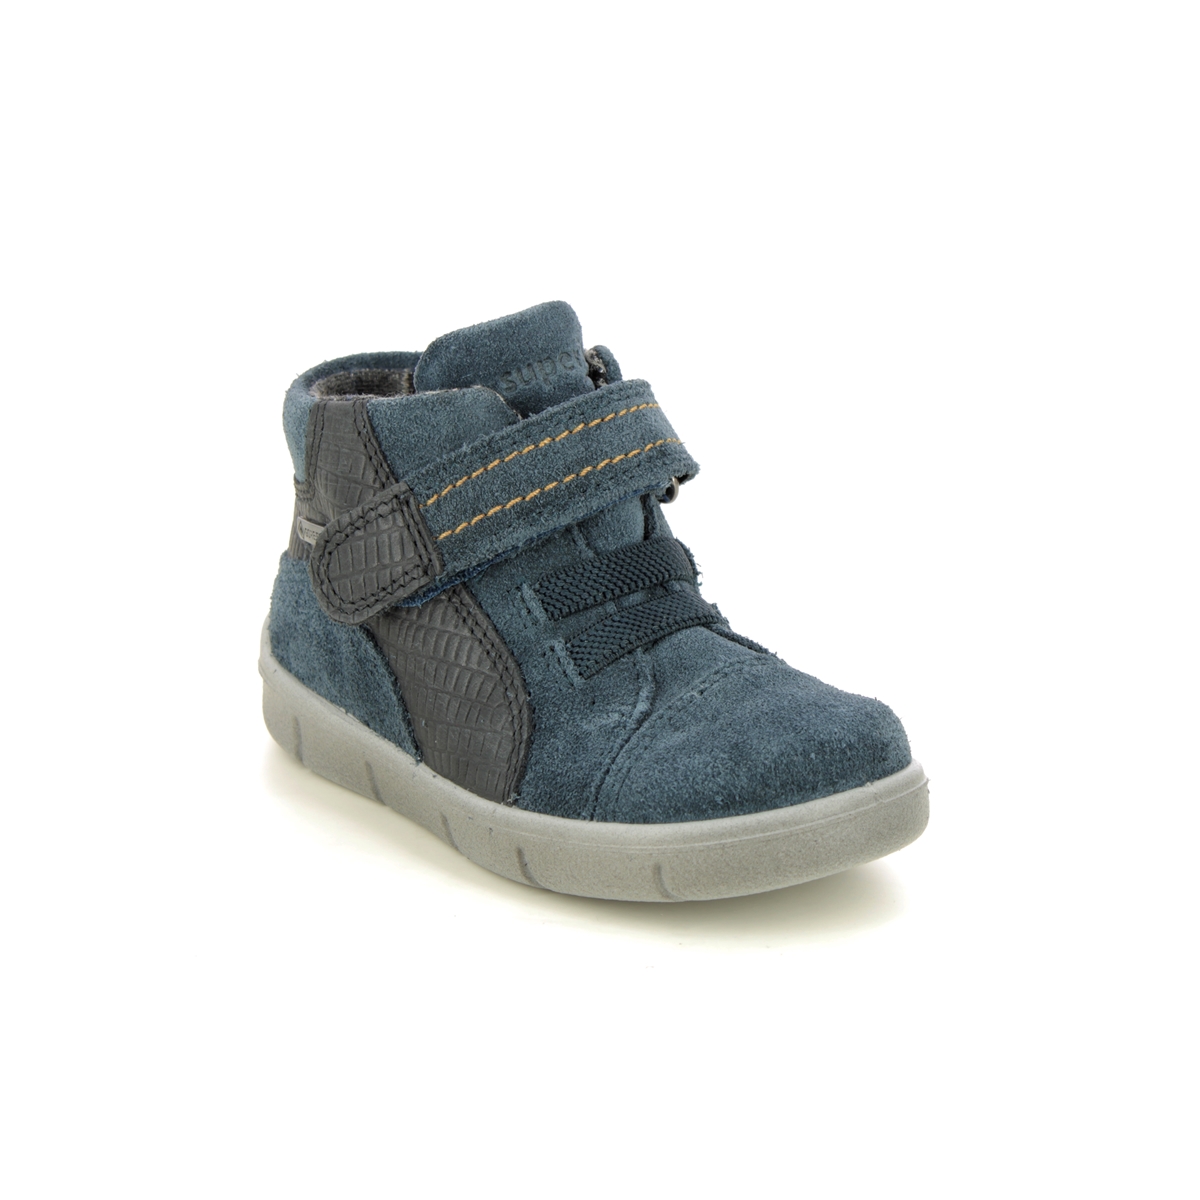 Superfit Ulli Bungee Gtx Blue Suede Kids Toddler Boys Boots 1009429-8000 In Size 24 In Plain Blue Suede For kids